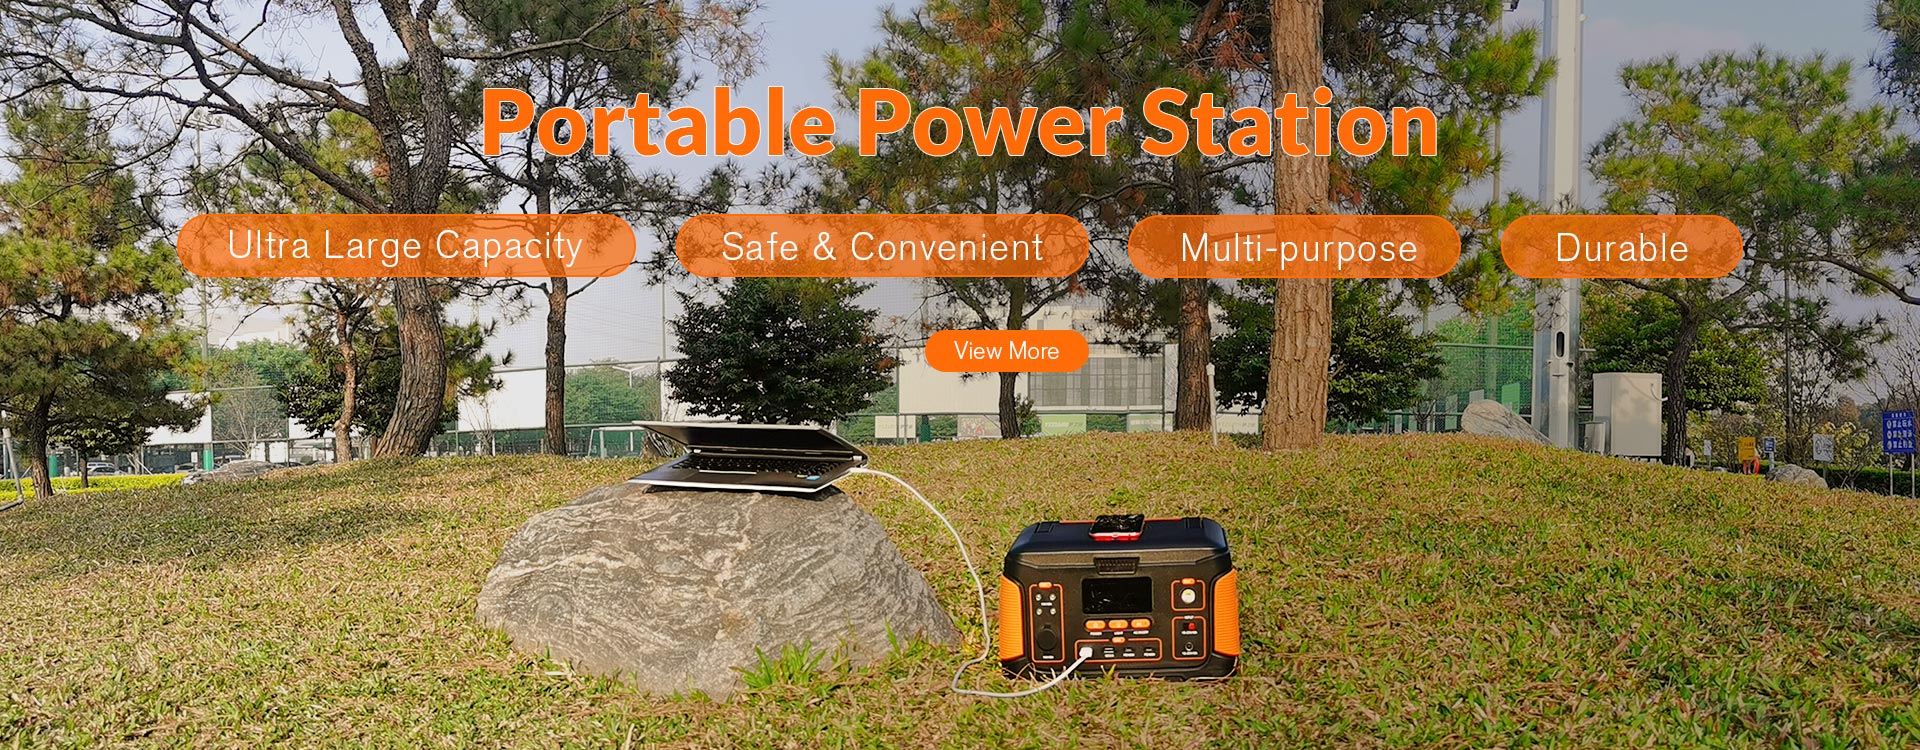 Camping Portable Power Station 